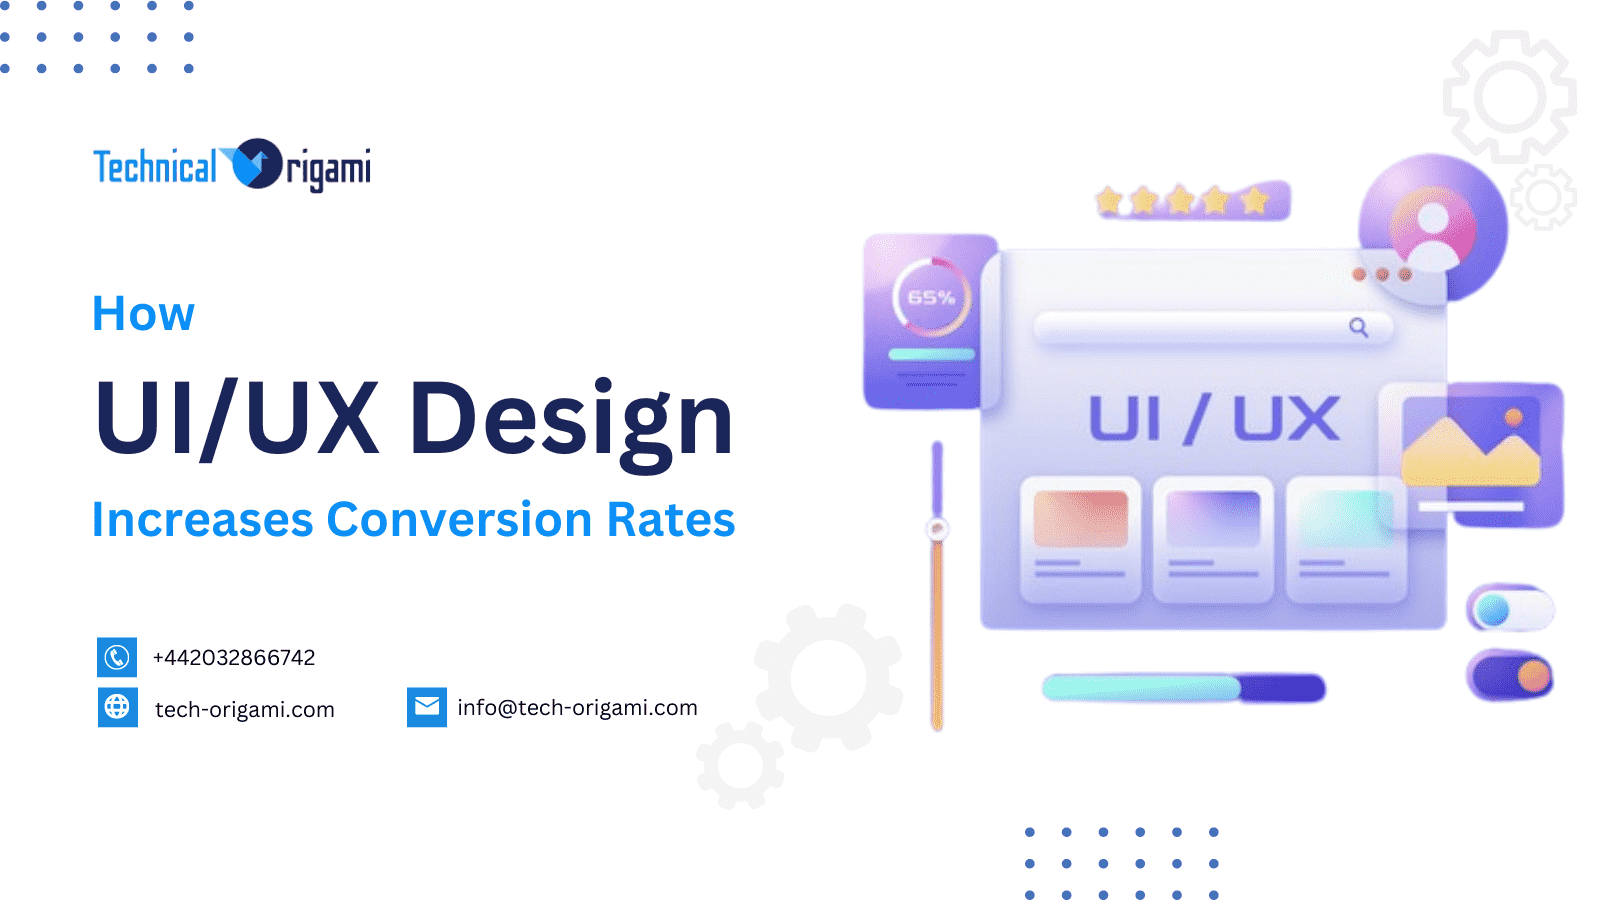 How UI/UX Design Increases Conversion Rates – Technical Origami